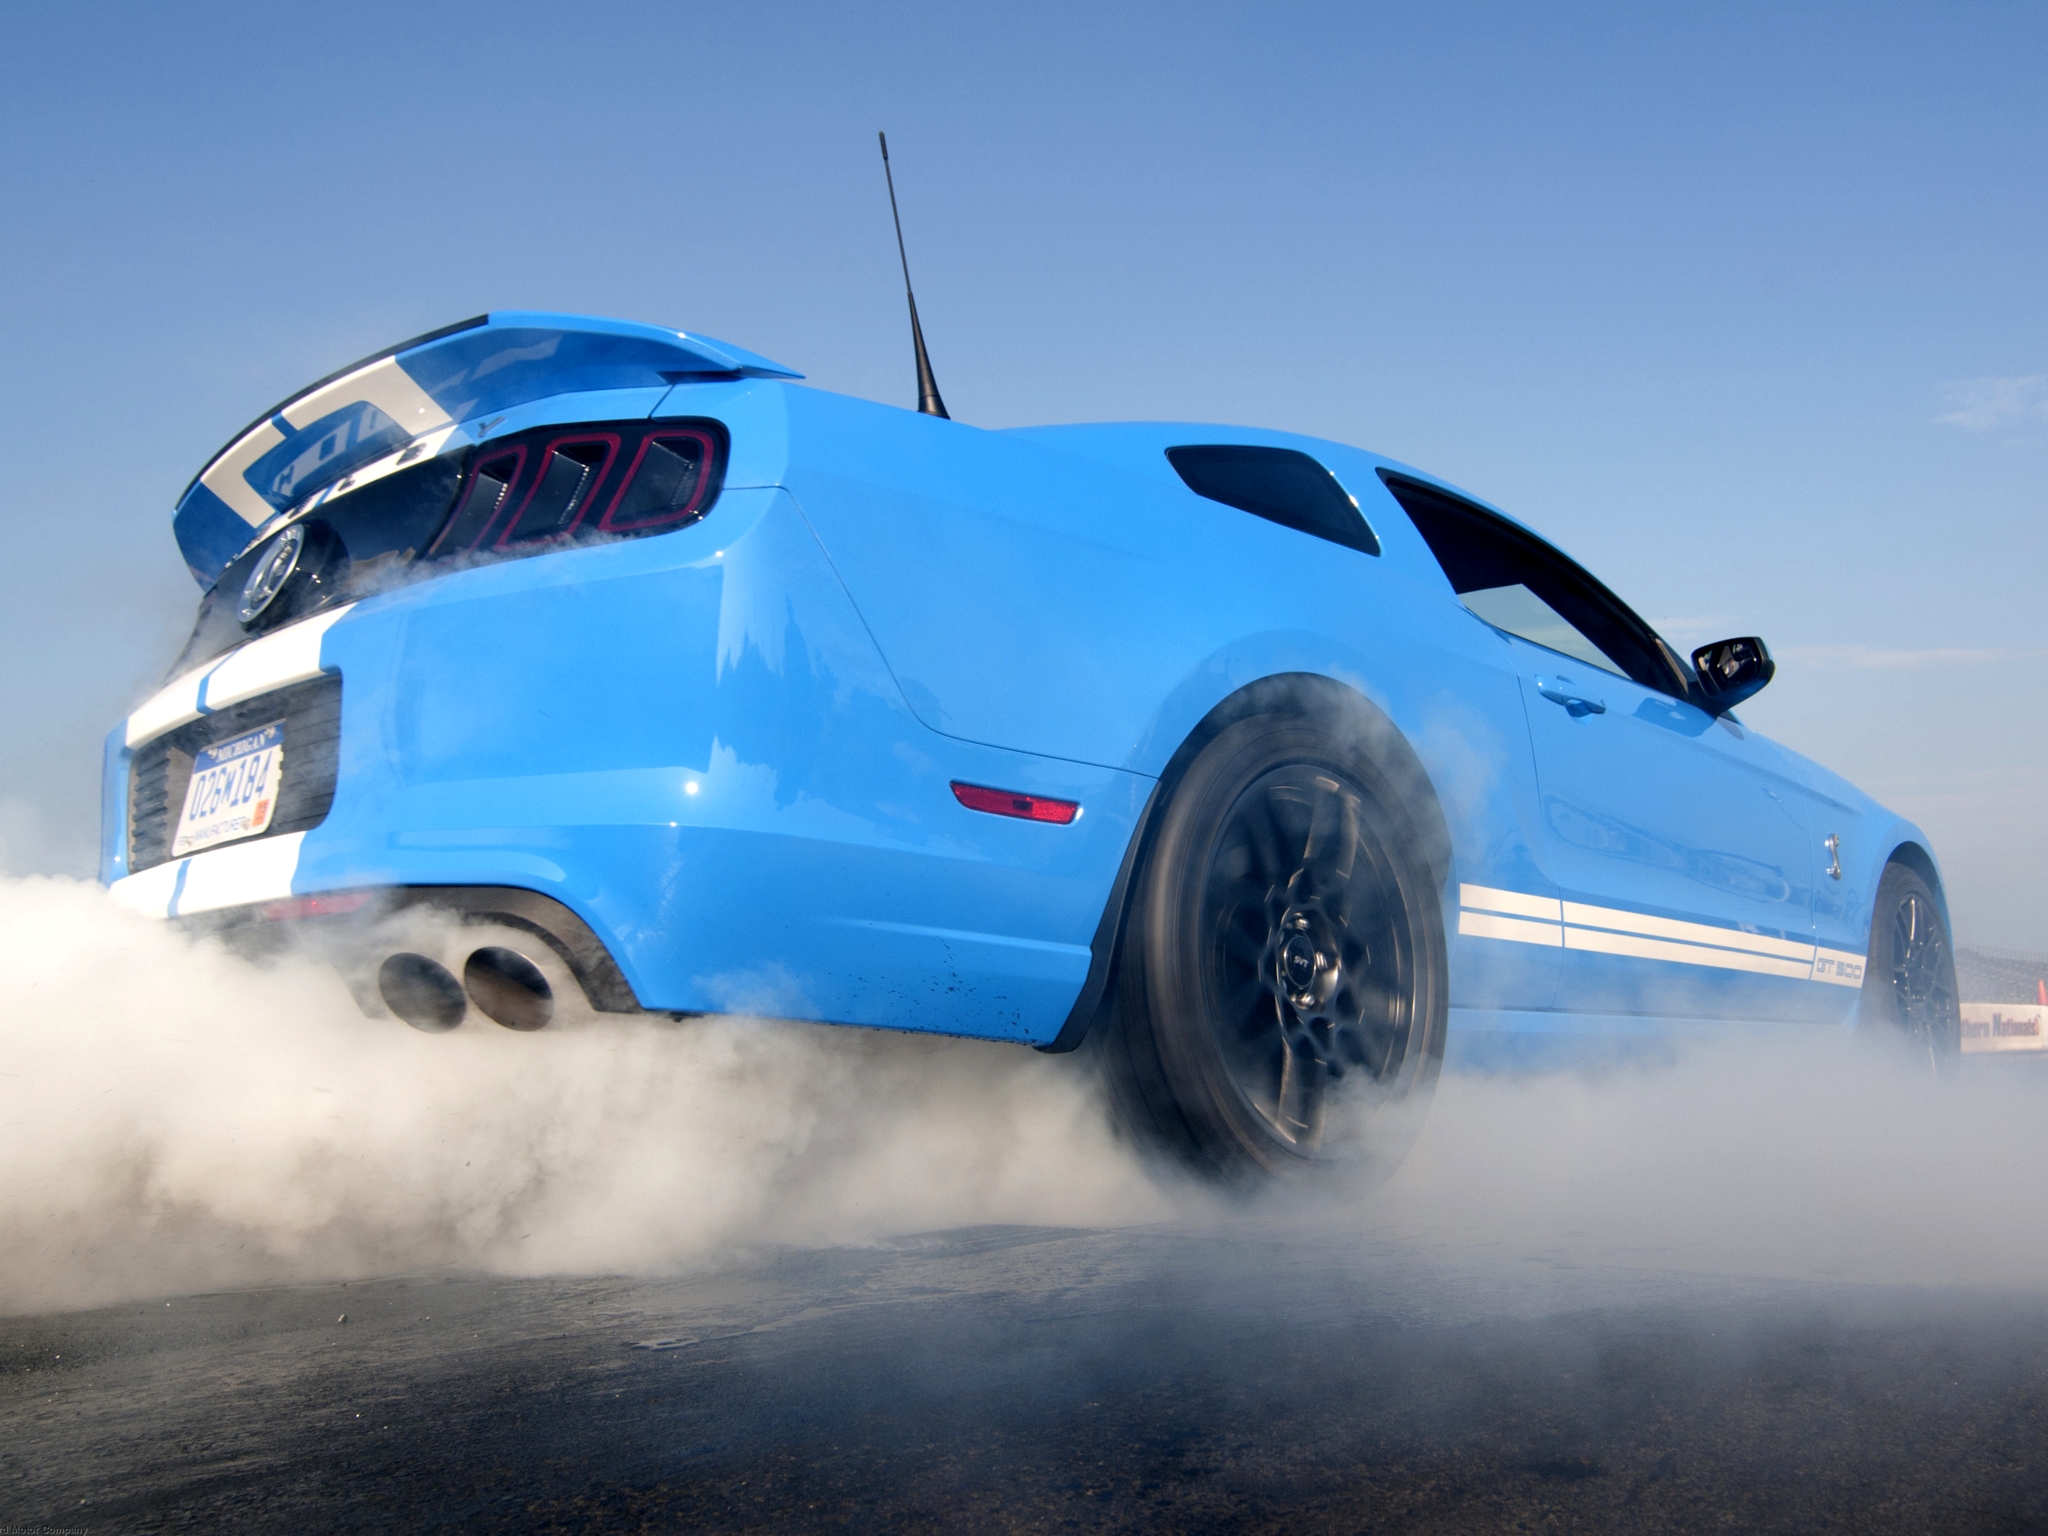 2012, Shelby, Gt500, Svt, Ford, Mustang, Muscle, Burnout, Smoke Wallpaper